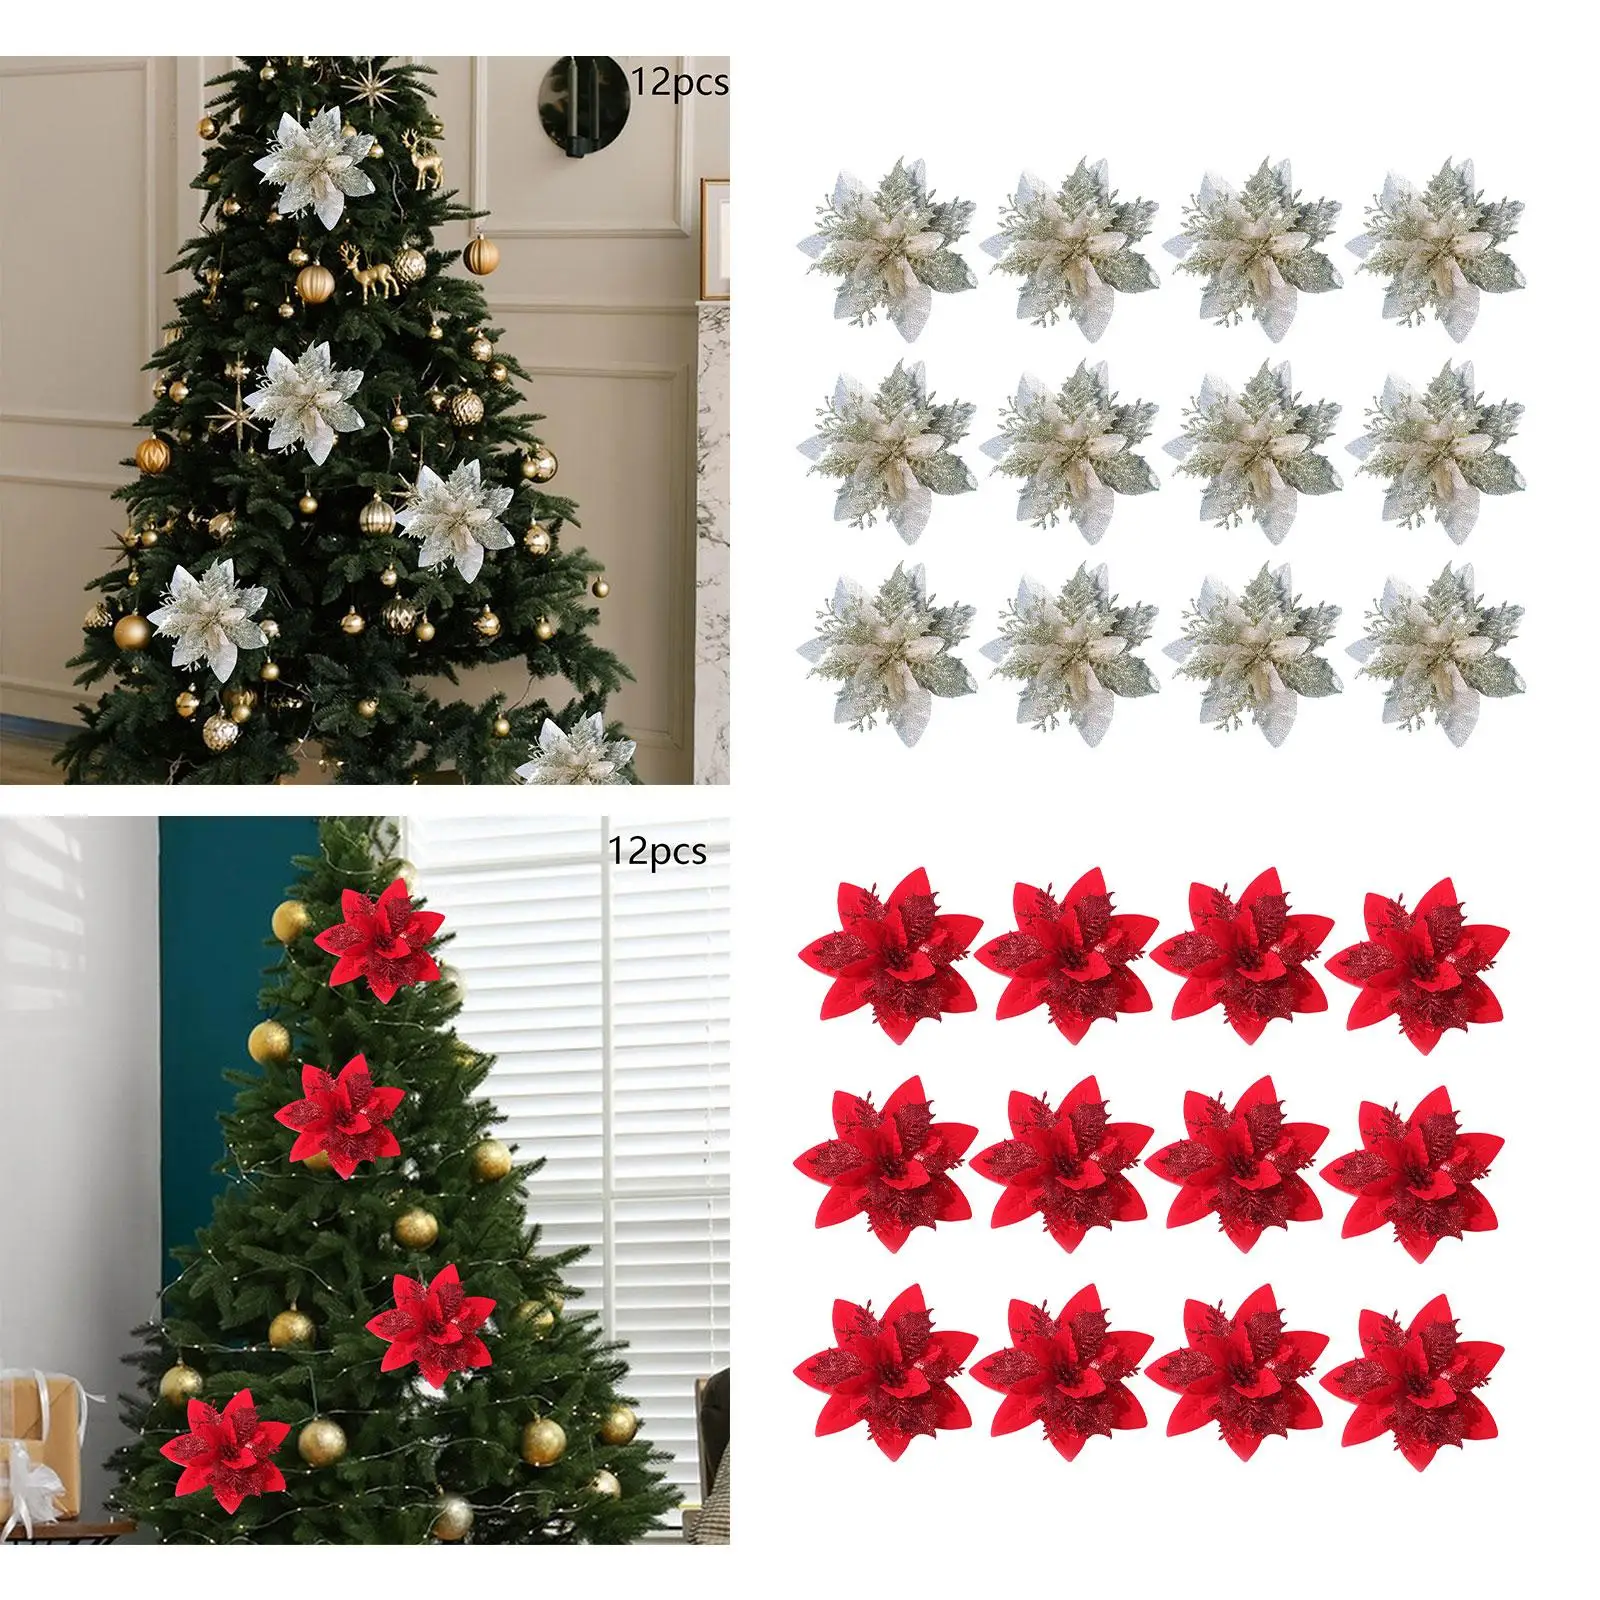 12x Glitter Christmas Flowers, Artificial Flowers Heads Christmas Tree Flower Decorations for Holiday Xmas Garland DIY Wreath